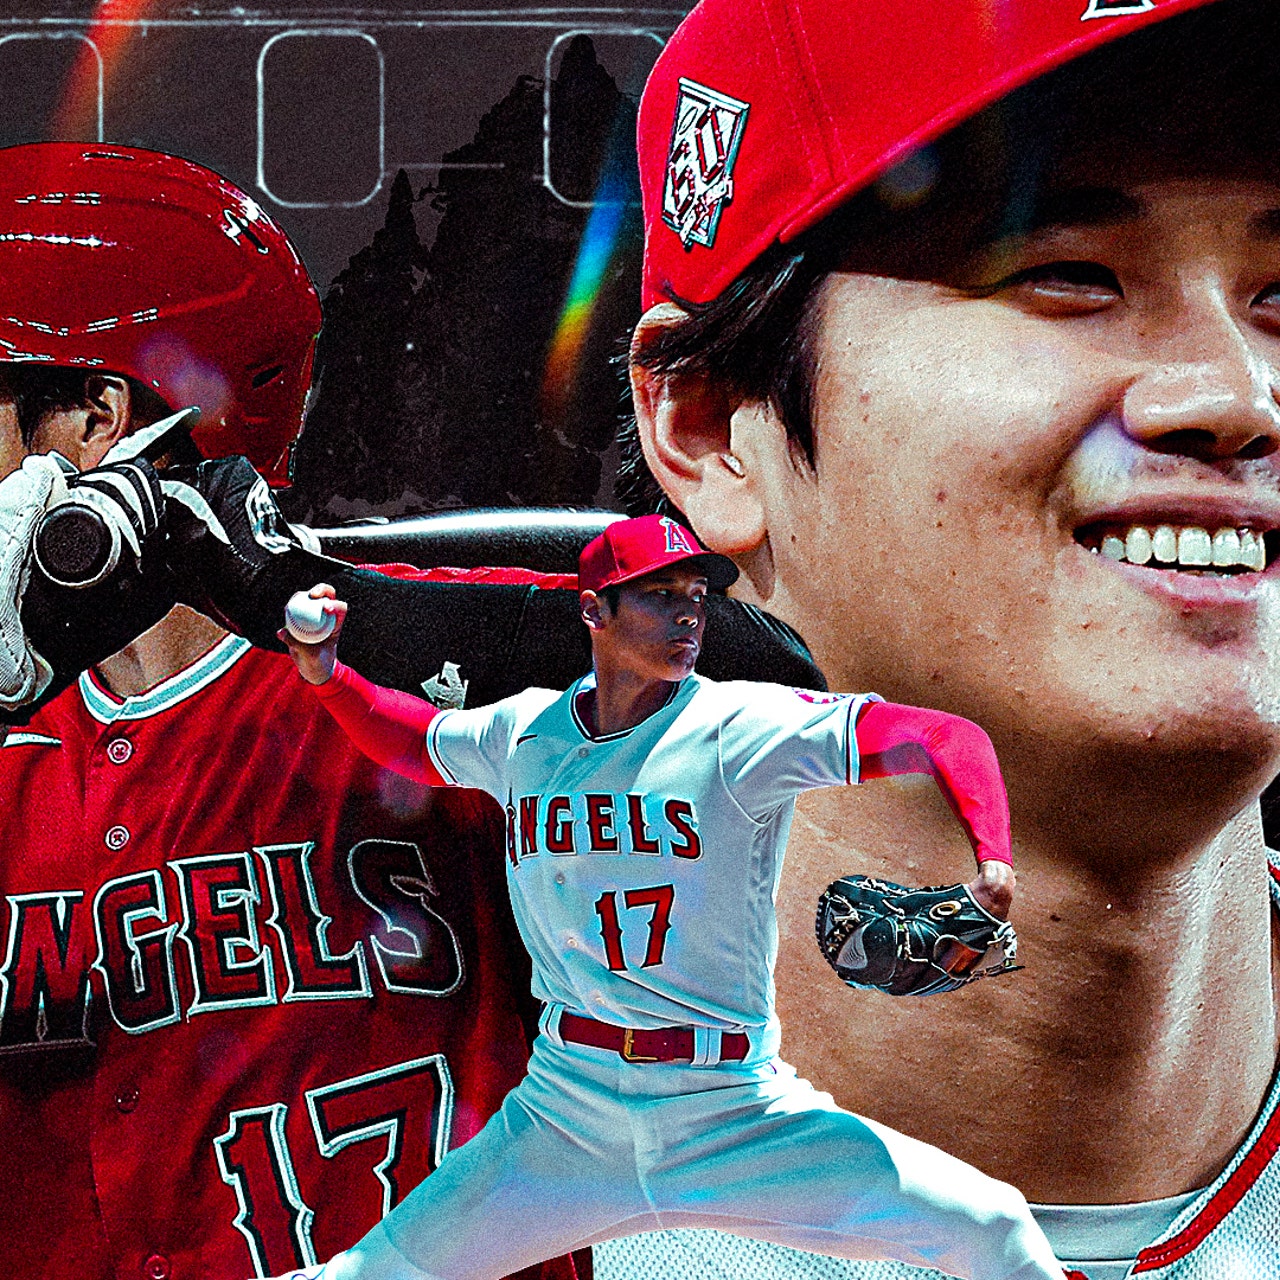 Los Angeles Angels' two-way star Shohei Ohtani giving Babe Ruth a